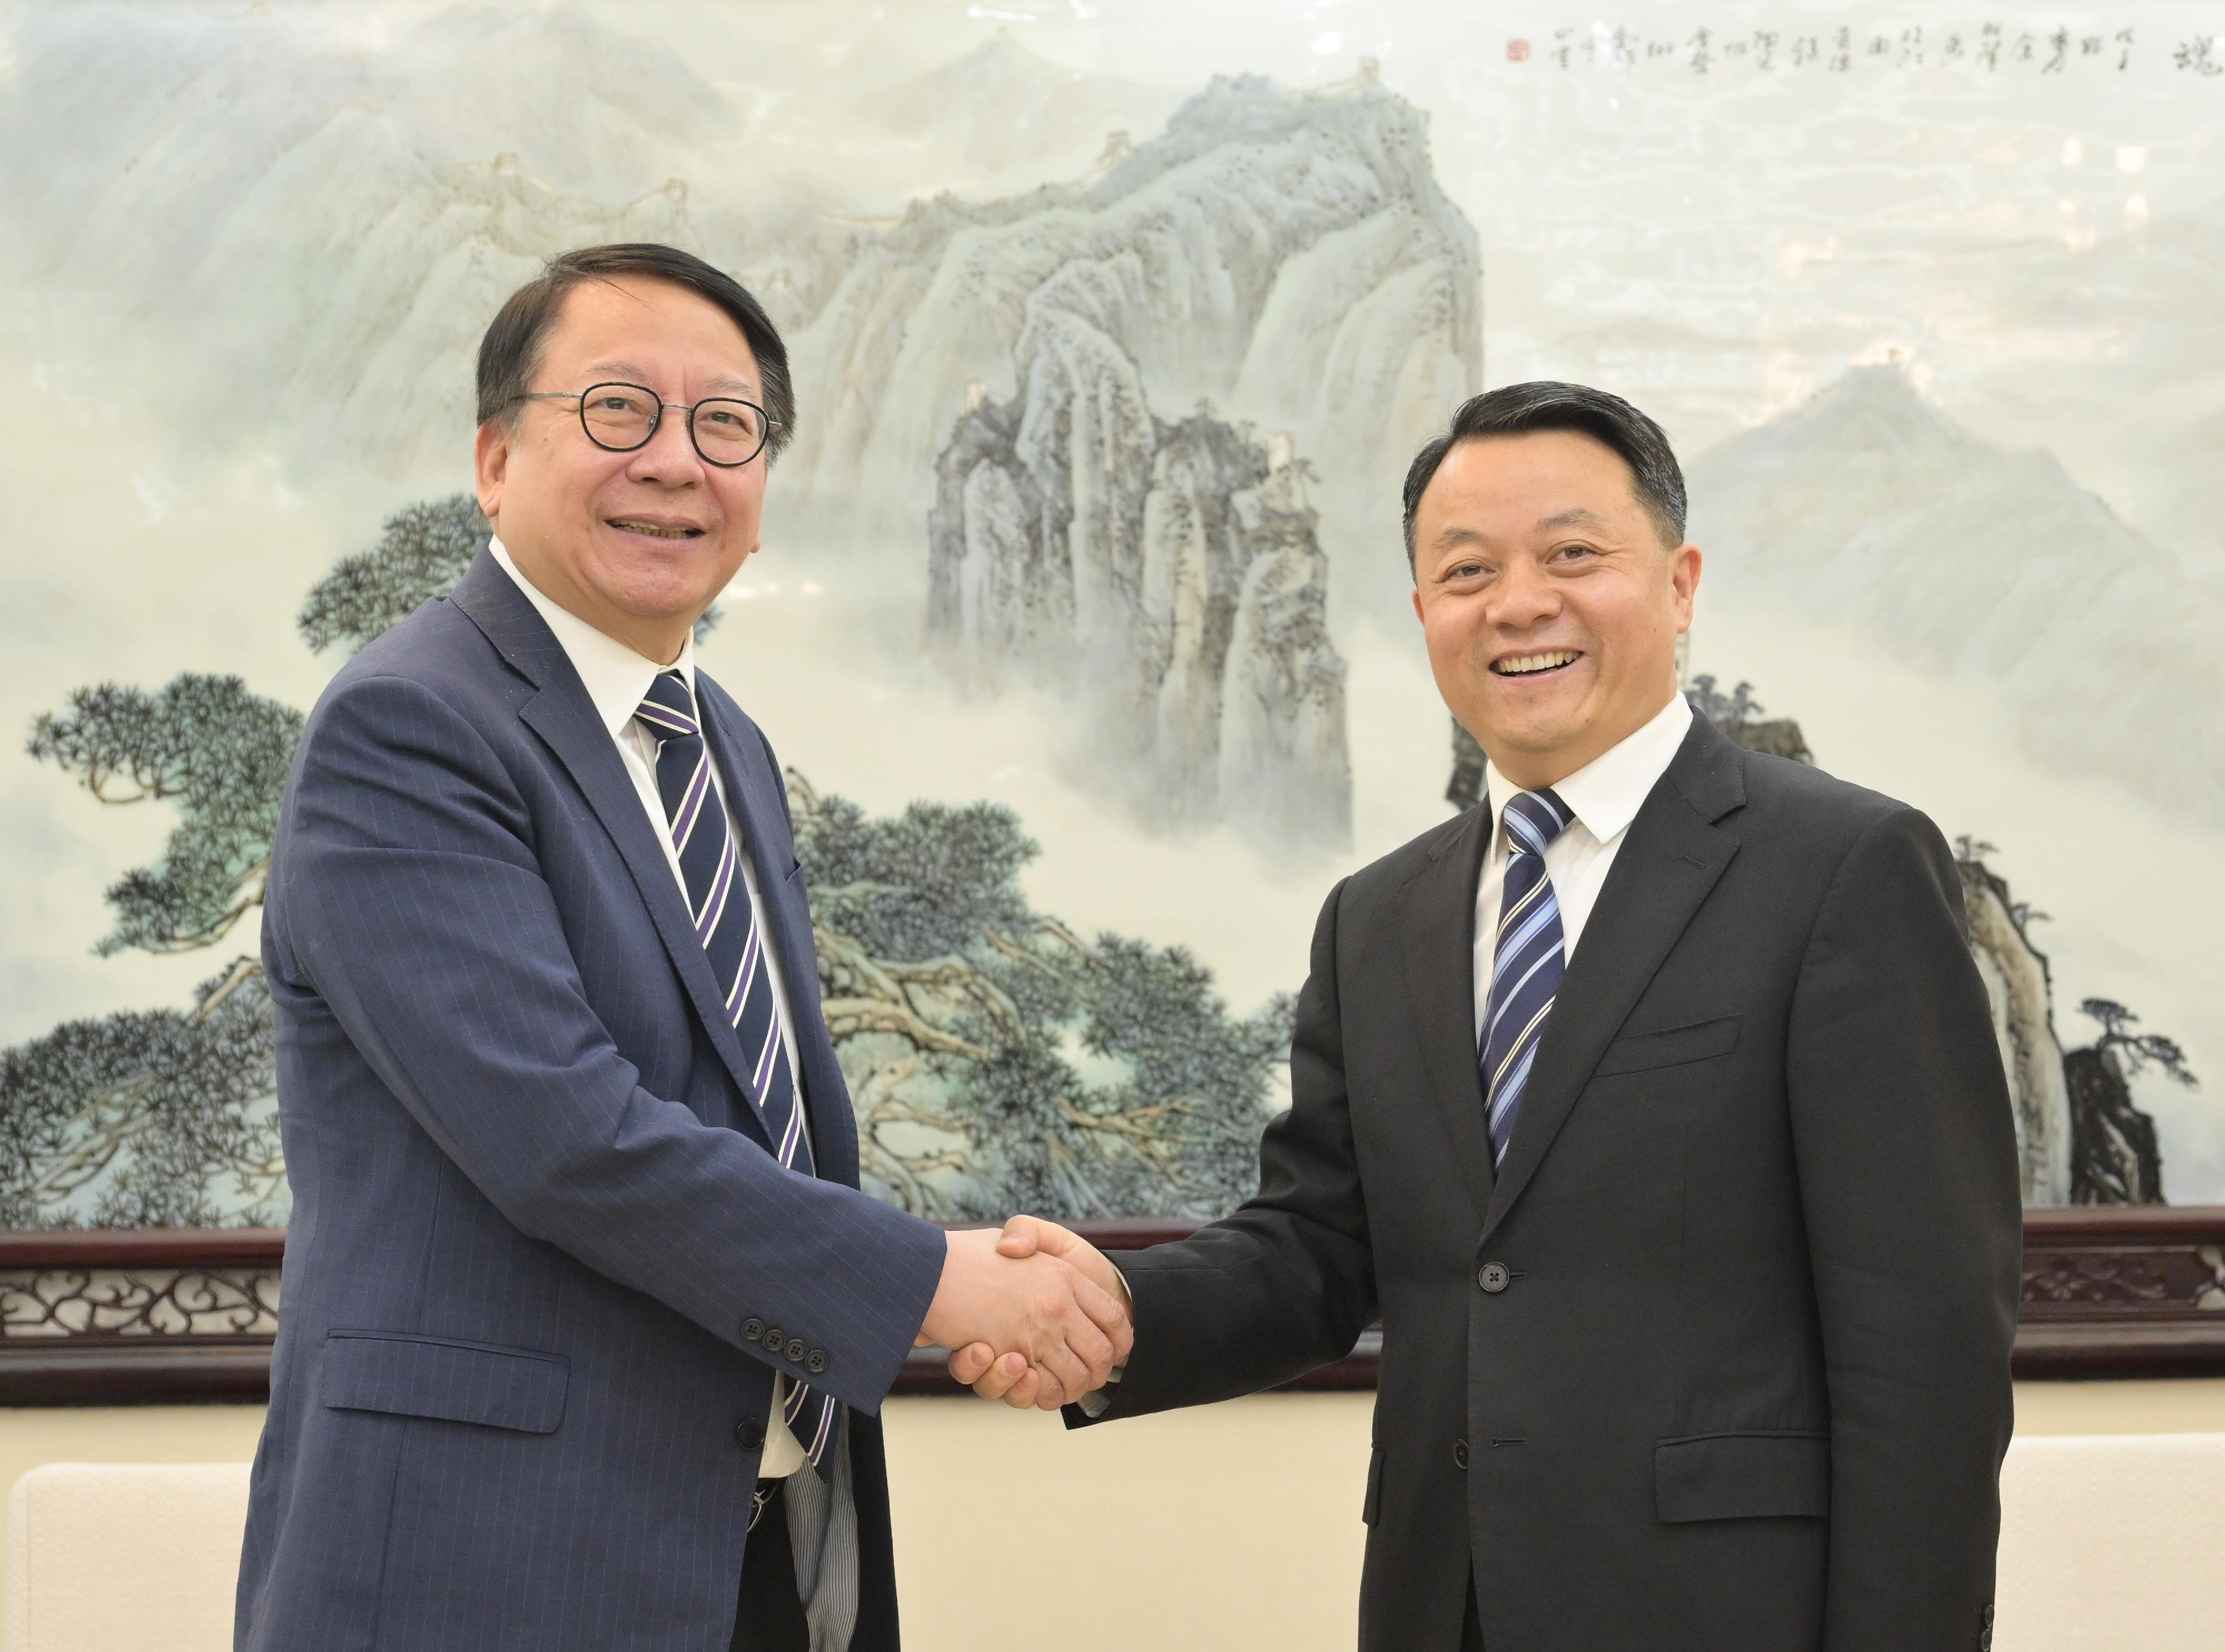 The Chief Secretary for Administration, Mr Chan Kwok-ki (left), meets with Vice President of All-China Youth Federation Mr Fu Zhenbang (right) in Beijing today (April 27).